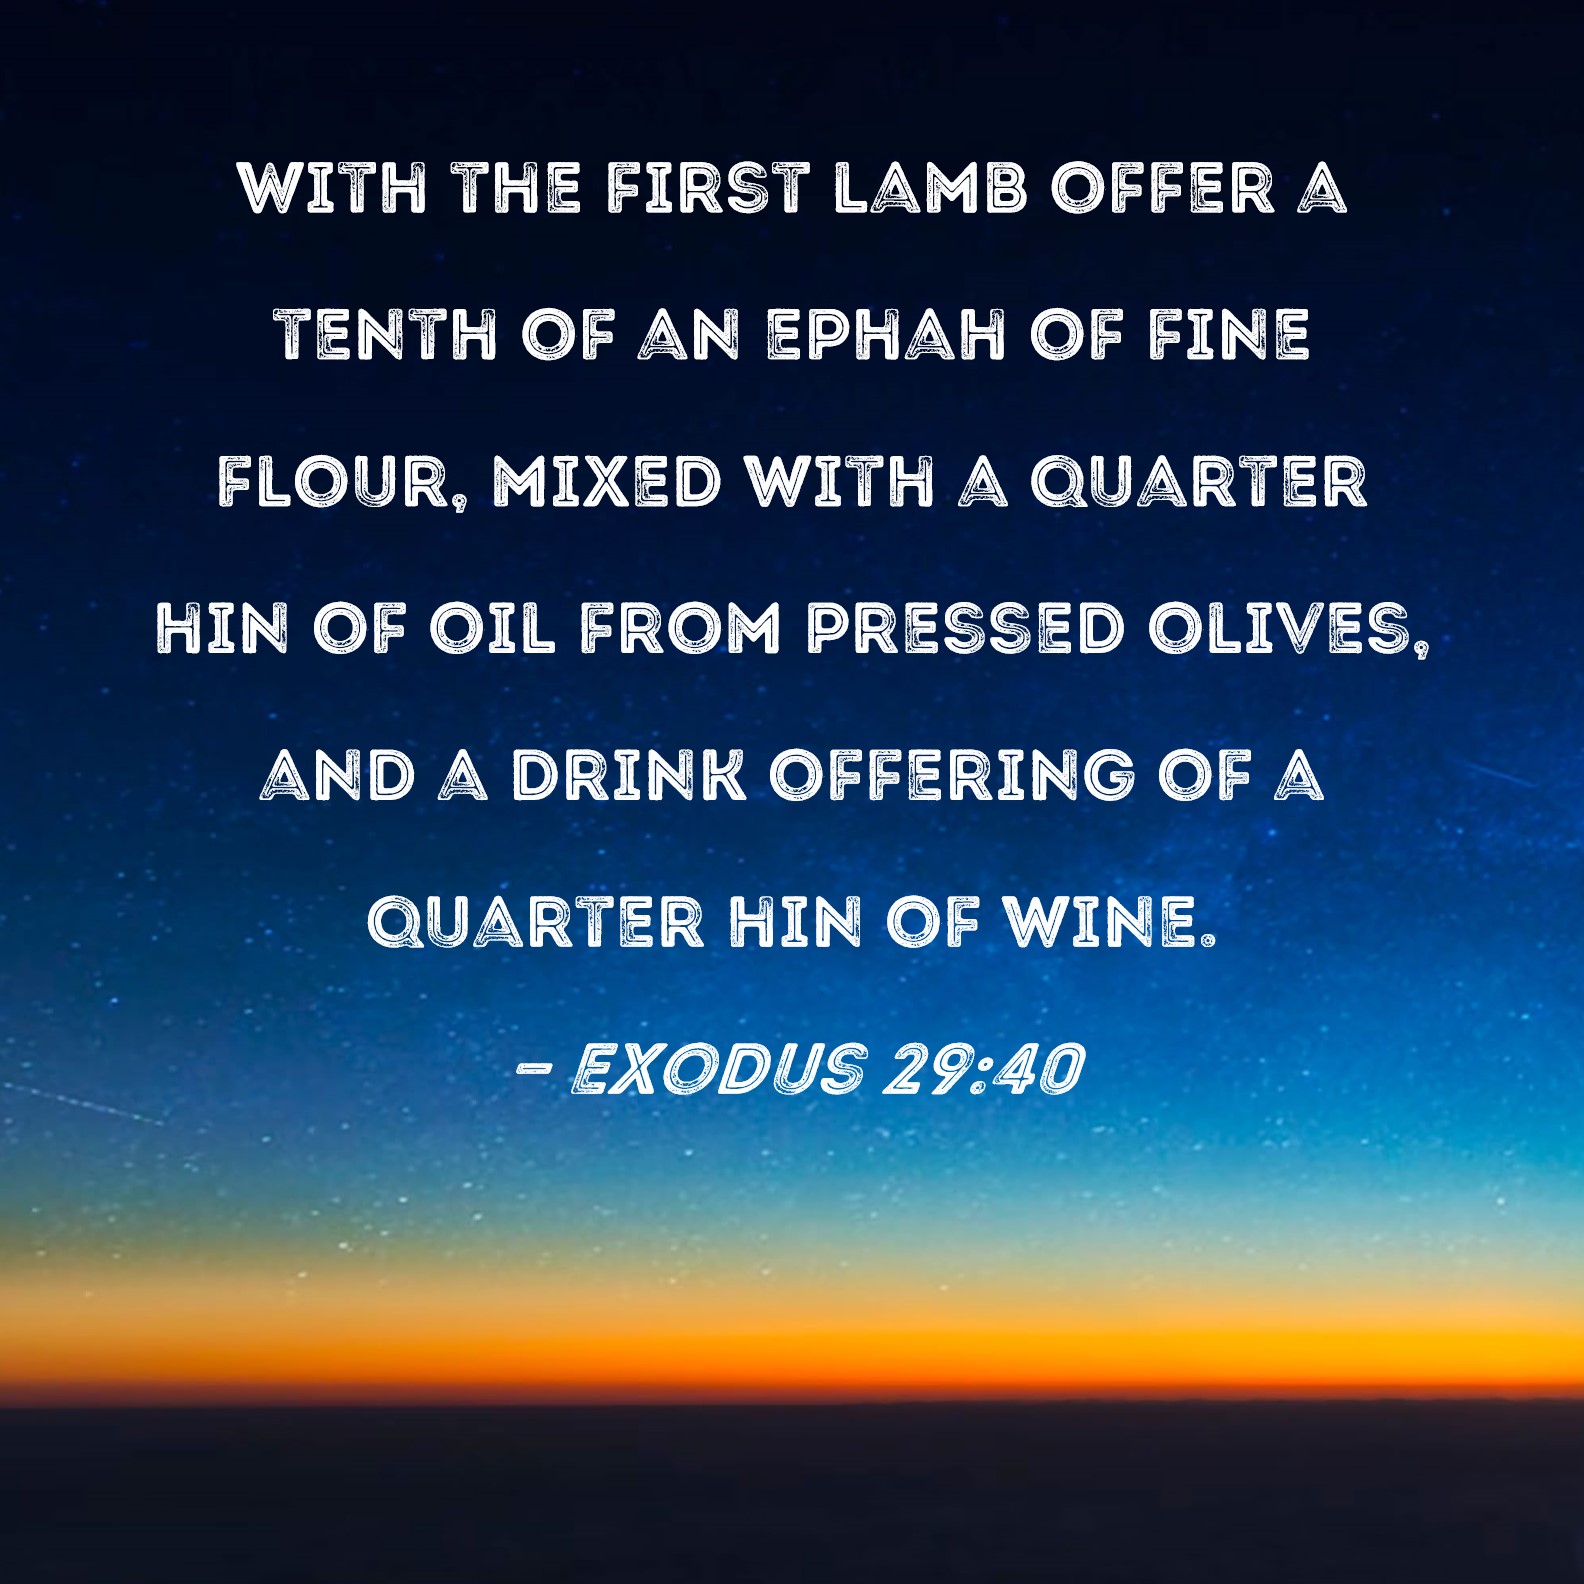 Creep mode Opgive Exodus 29:40 With the first lamb offer a tenth of an ephah of fine flour,  mixed with a quarter hin of oil from pressed olives, and a drink offering  of a quarter